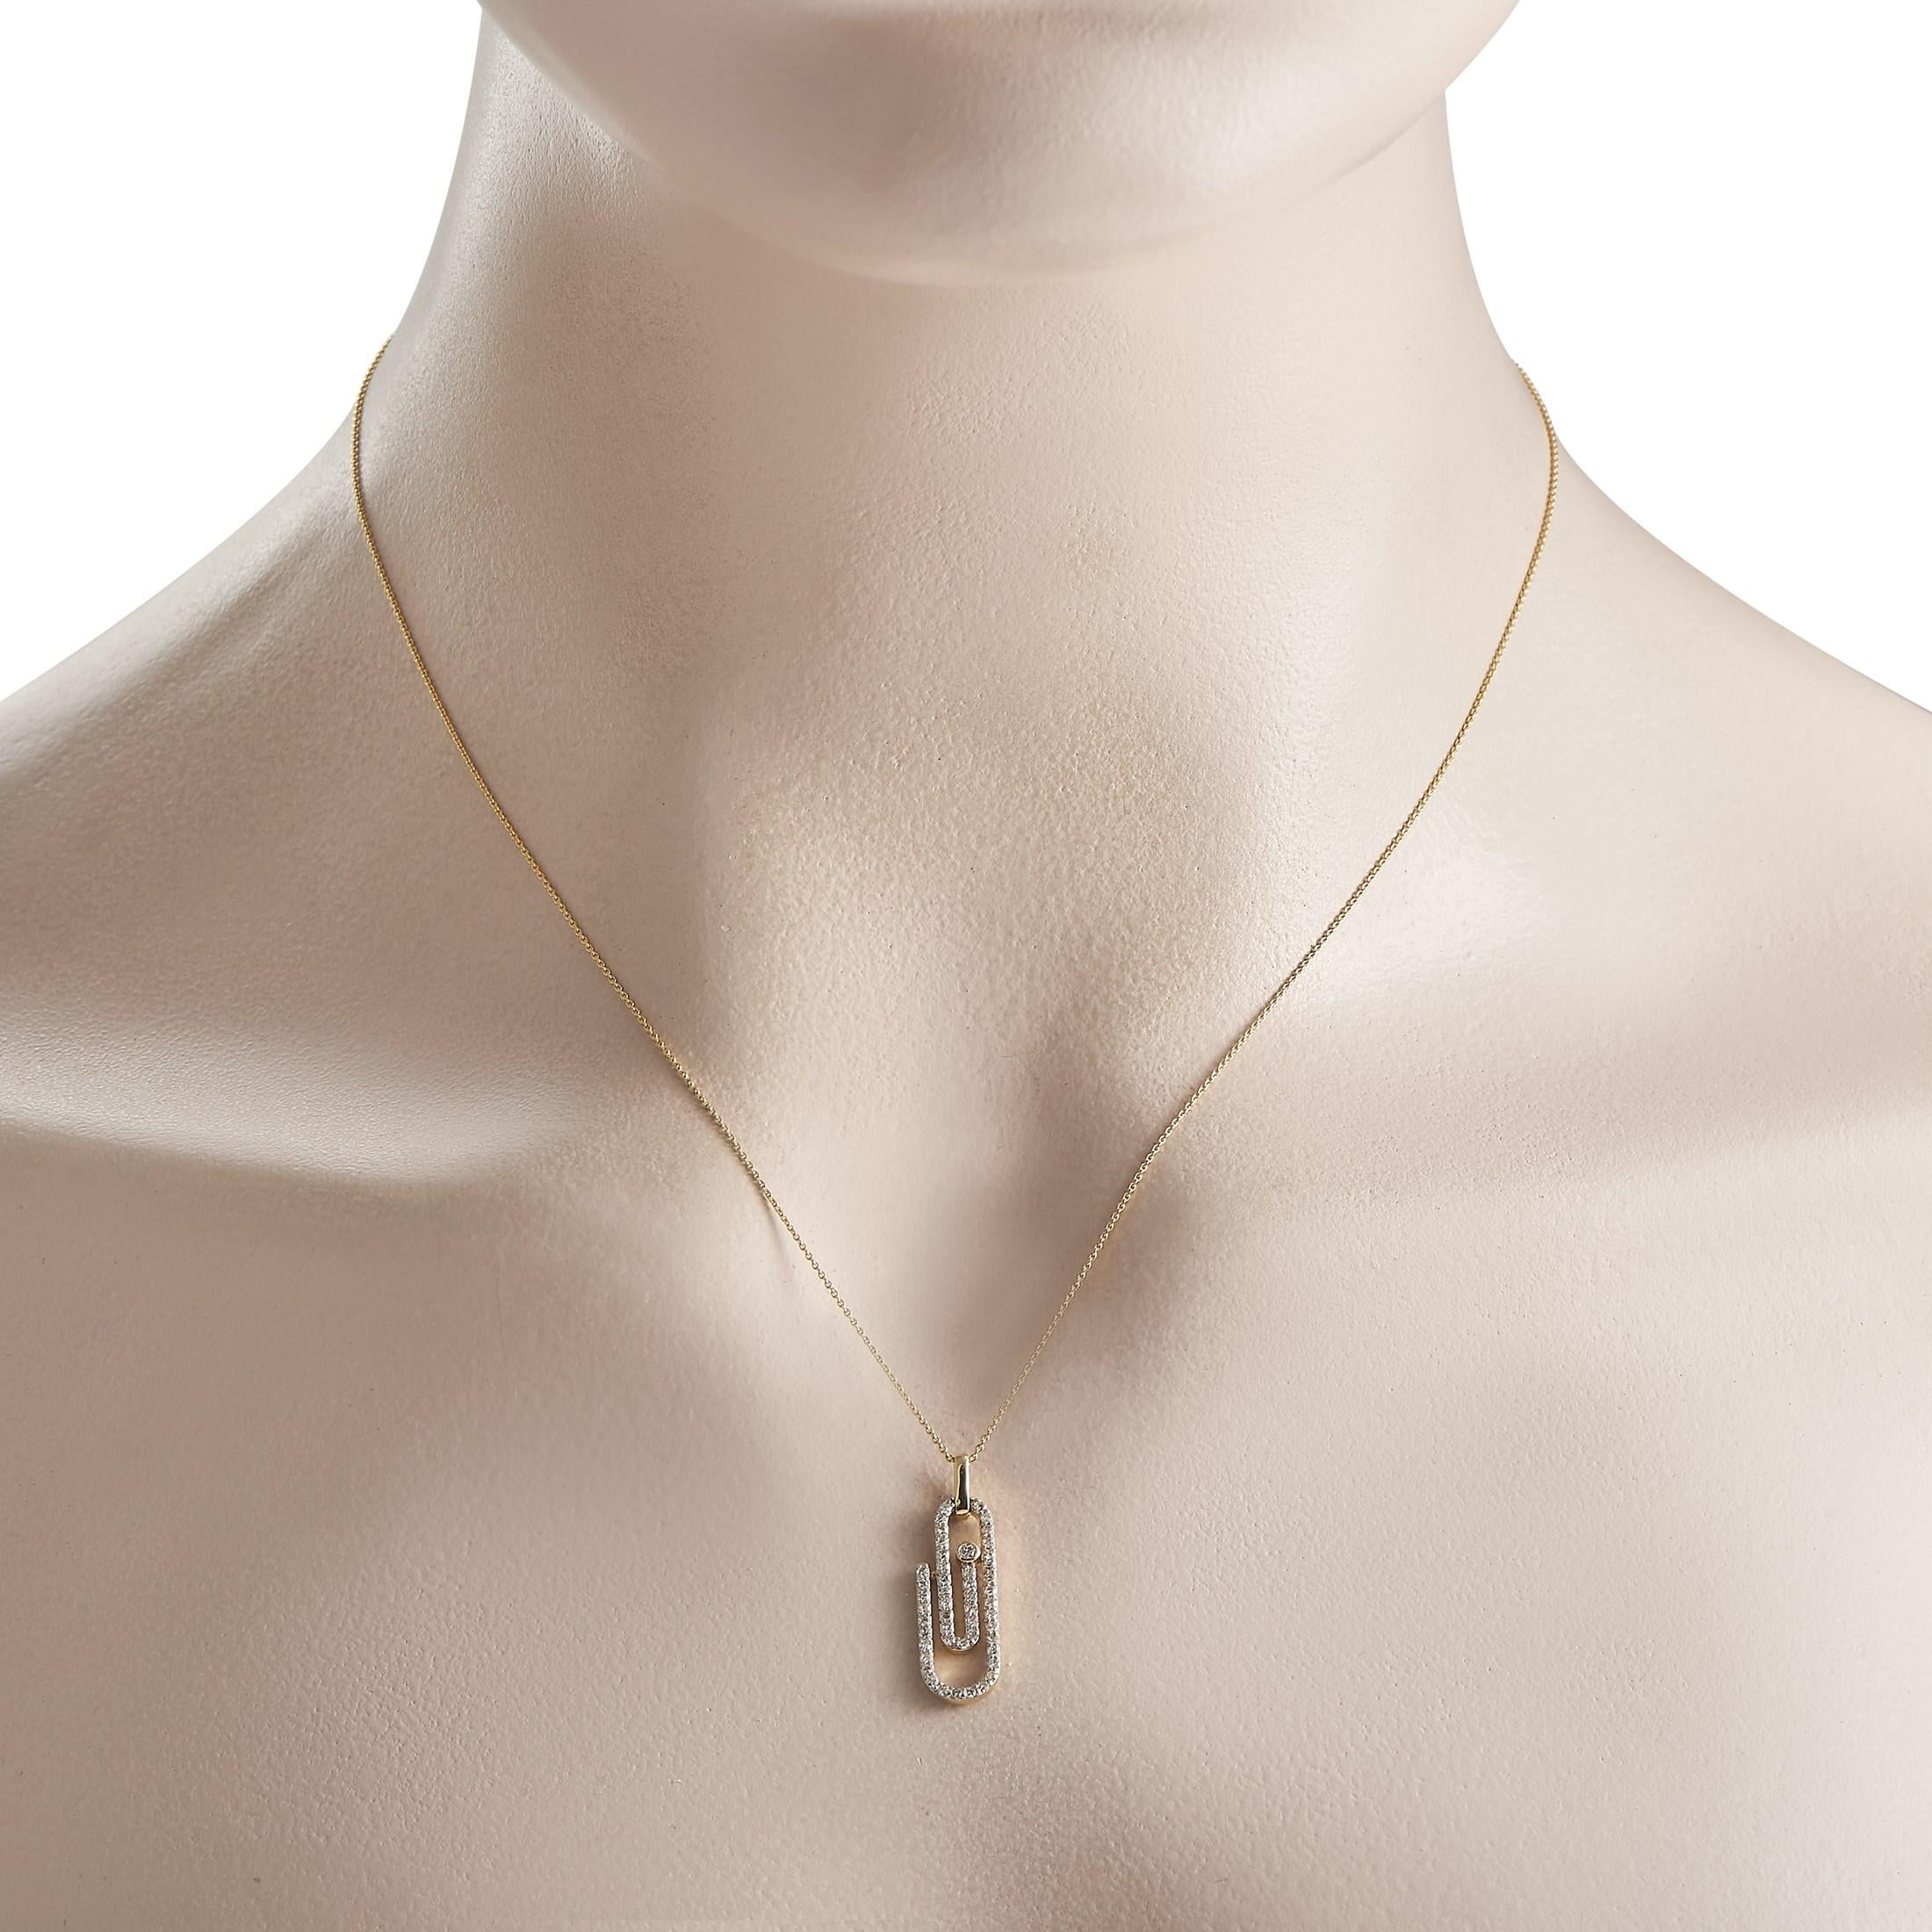 All it takes is modern, cool girl jewelrylike this diamond paperclip necklaceto jazz up your favorite basic ensembles. This yellow gold necklace features an 18 chain and a 0.75 x 0.37 paperclip-shaped pendant. Petite round diamonds trace the